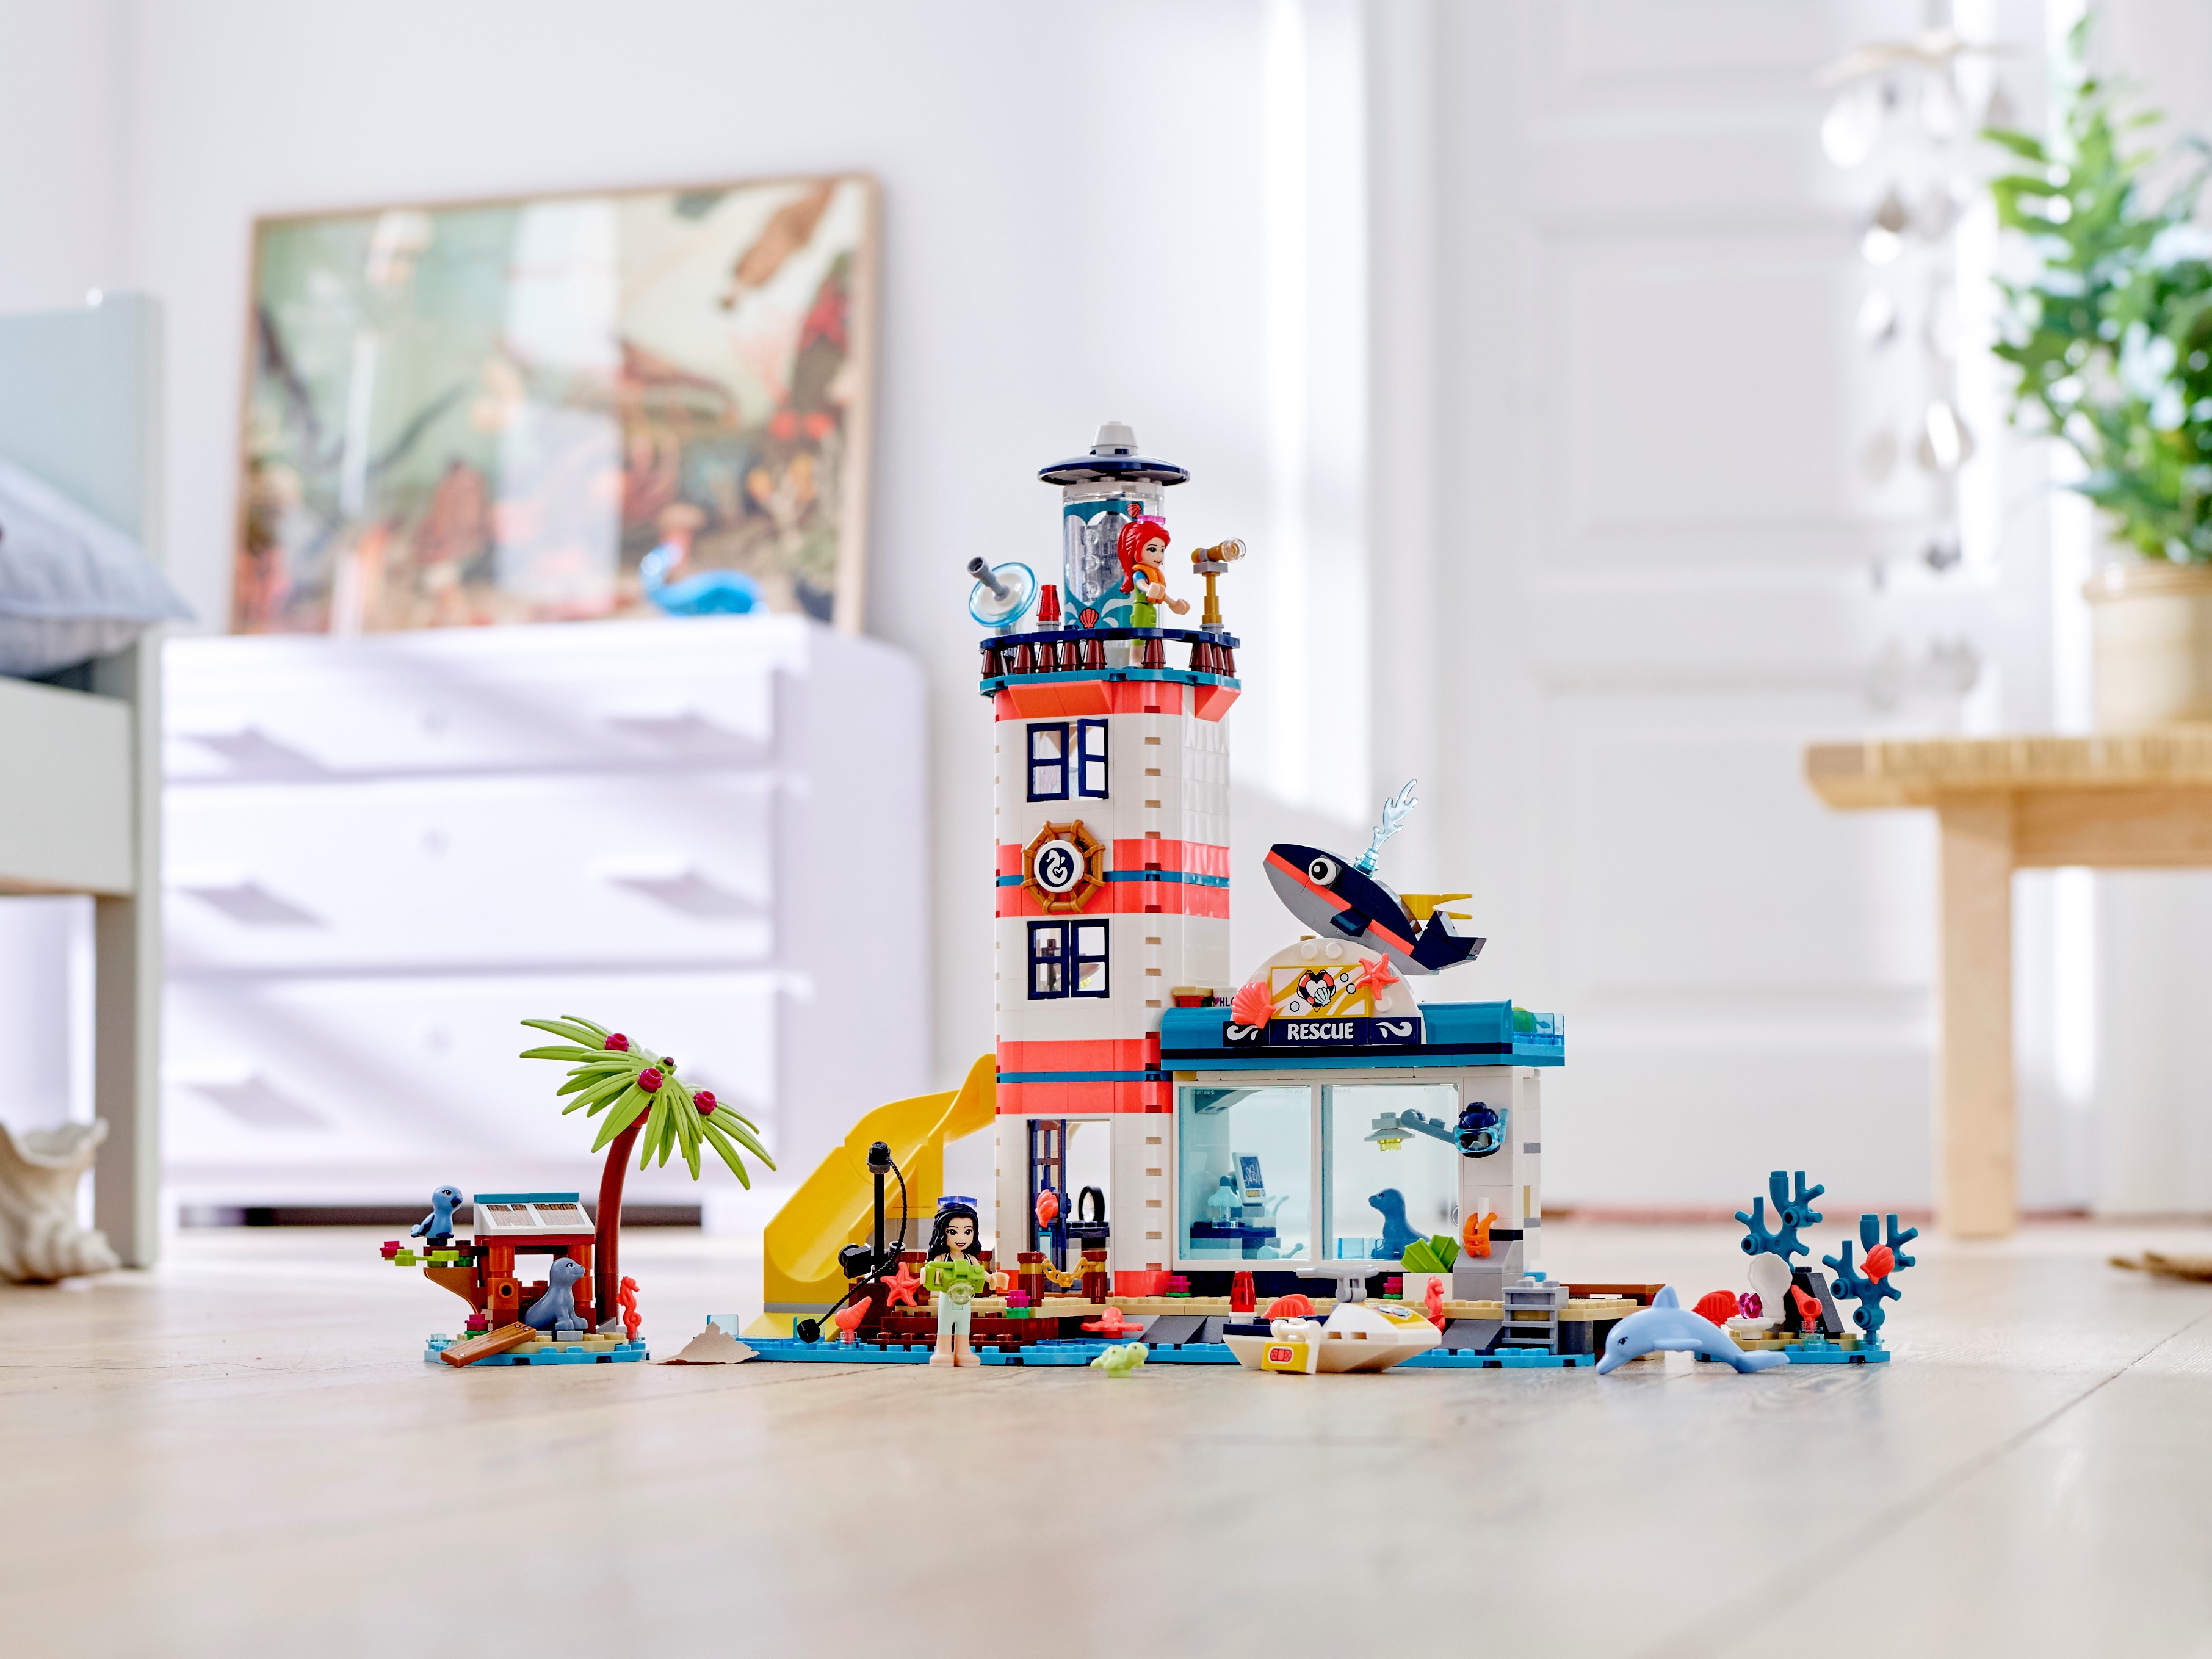 41380 for sale online LEGO Lighthouse Rescue Center LEGO Friends